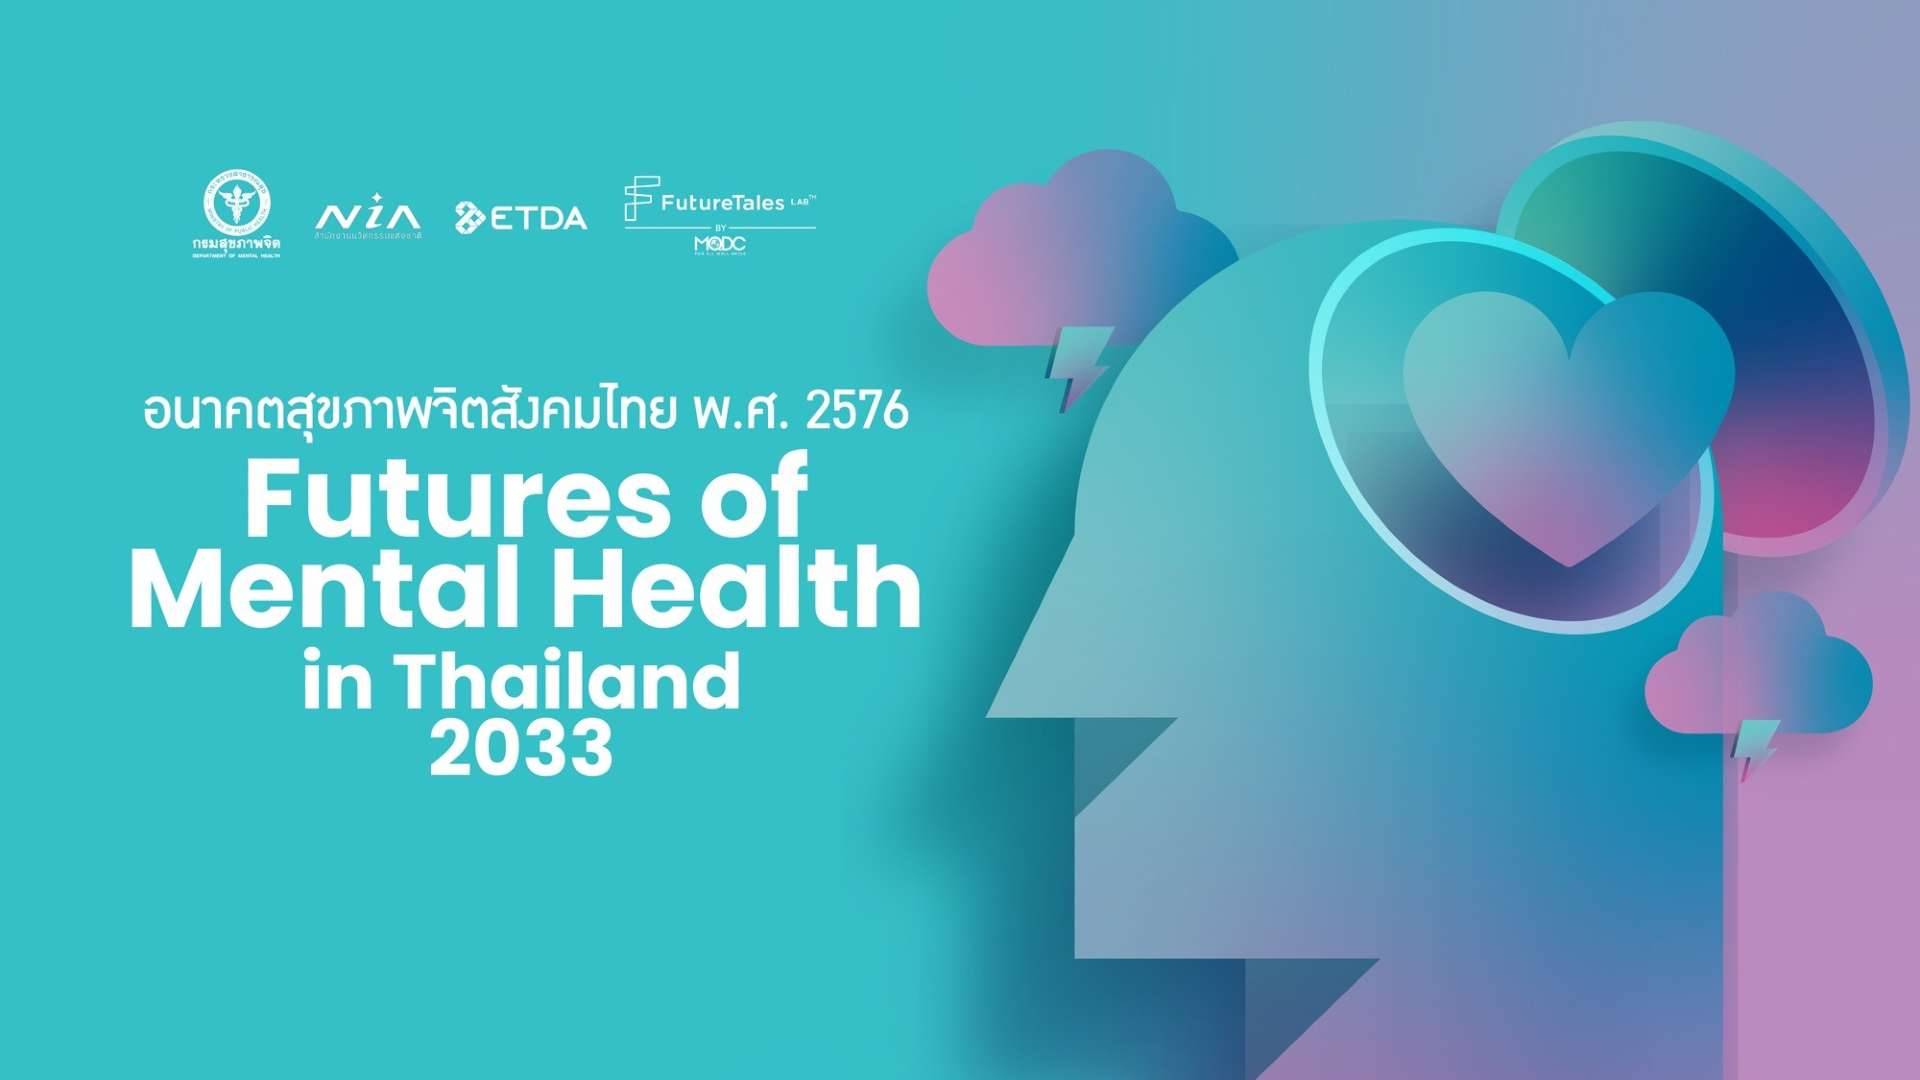 Futures of Mental Health in Thailand 2033